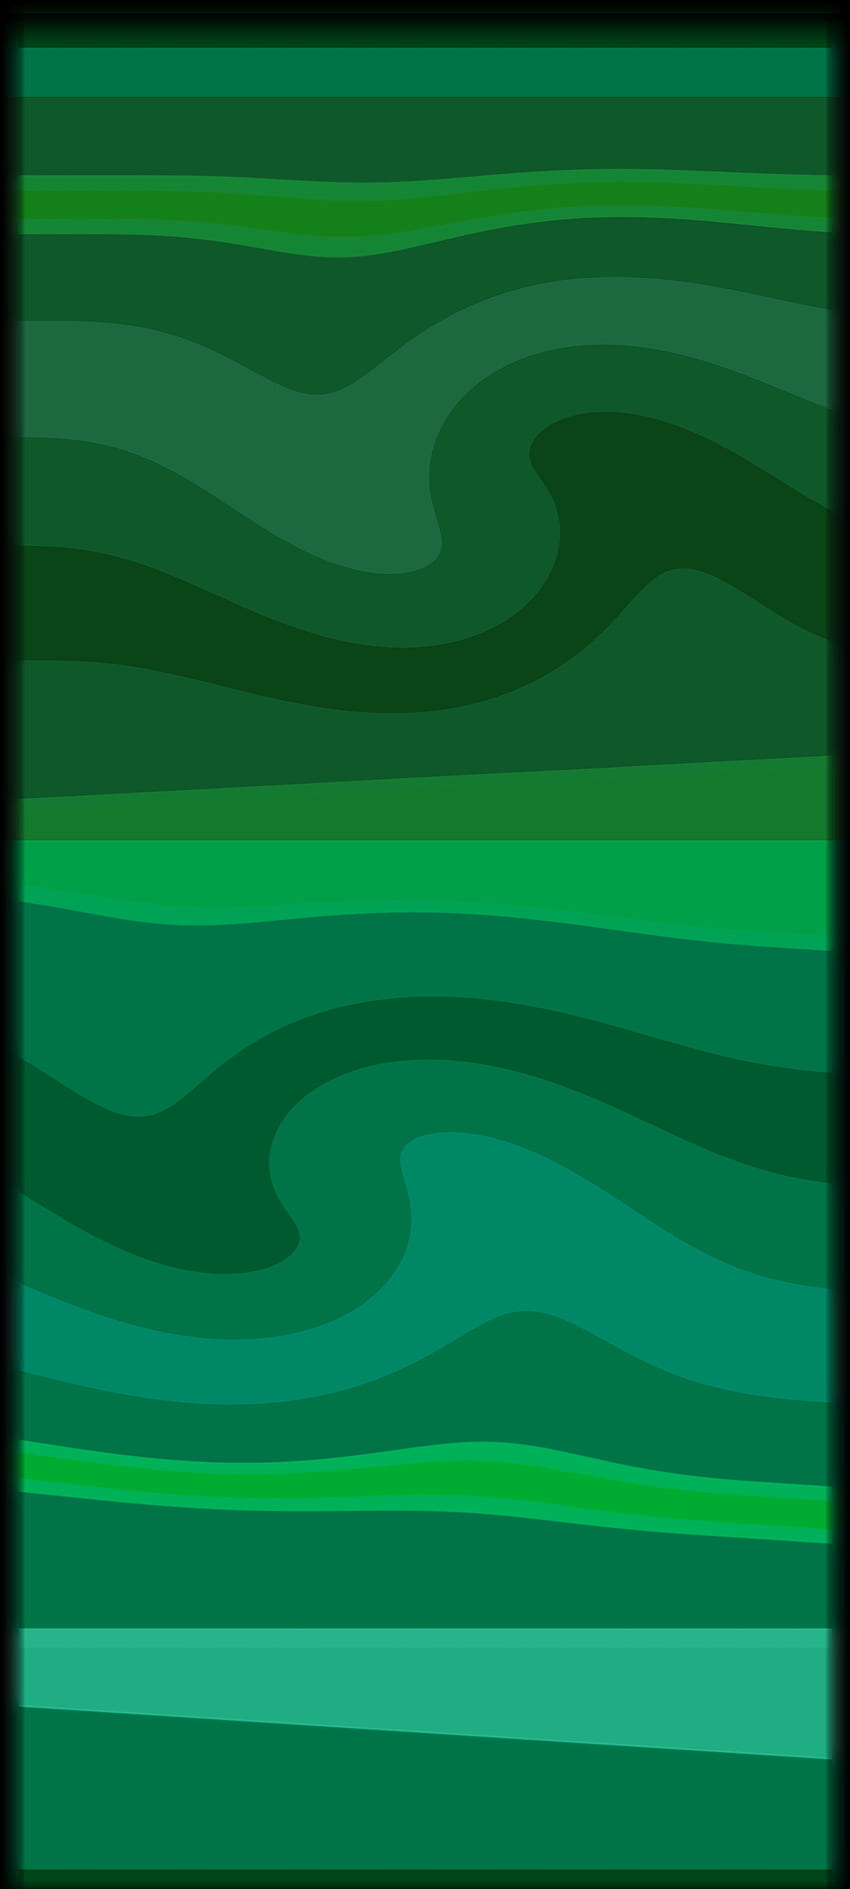 Green Android 2021, iPhone, Basic, Galaxy, New, Art, iPhone 13, pattern, Cool, Modern, Surface, , design, Smooth, locked, A51, Background, Galaxy S21, Druffix, M32, Magma, Acer, No1, Apple, Colors, S10, Galaxy A32, Love, LG, Samsung, Edge, Nokia, Original, Smartphone HD phone wallpaper